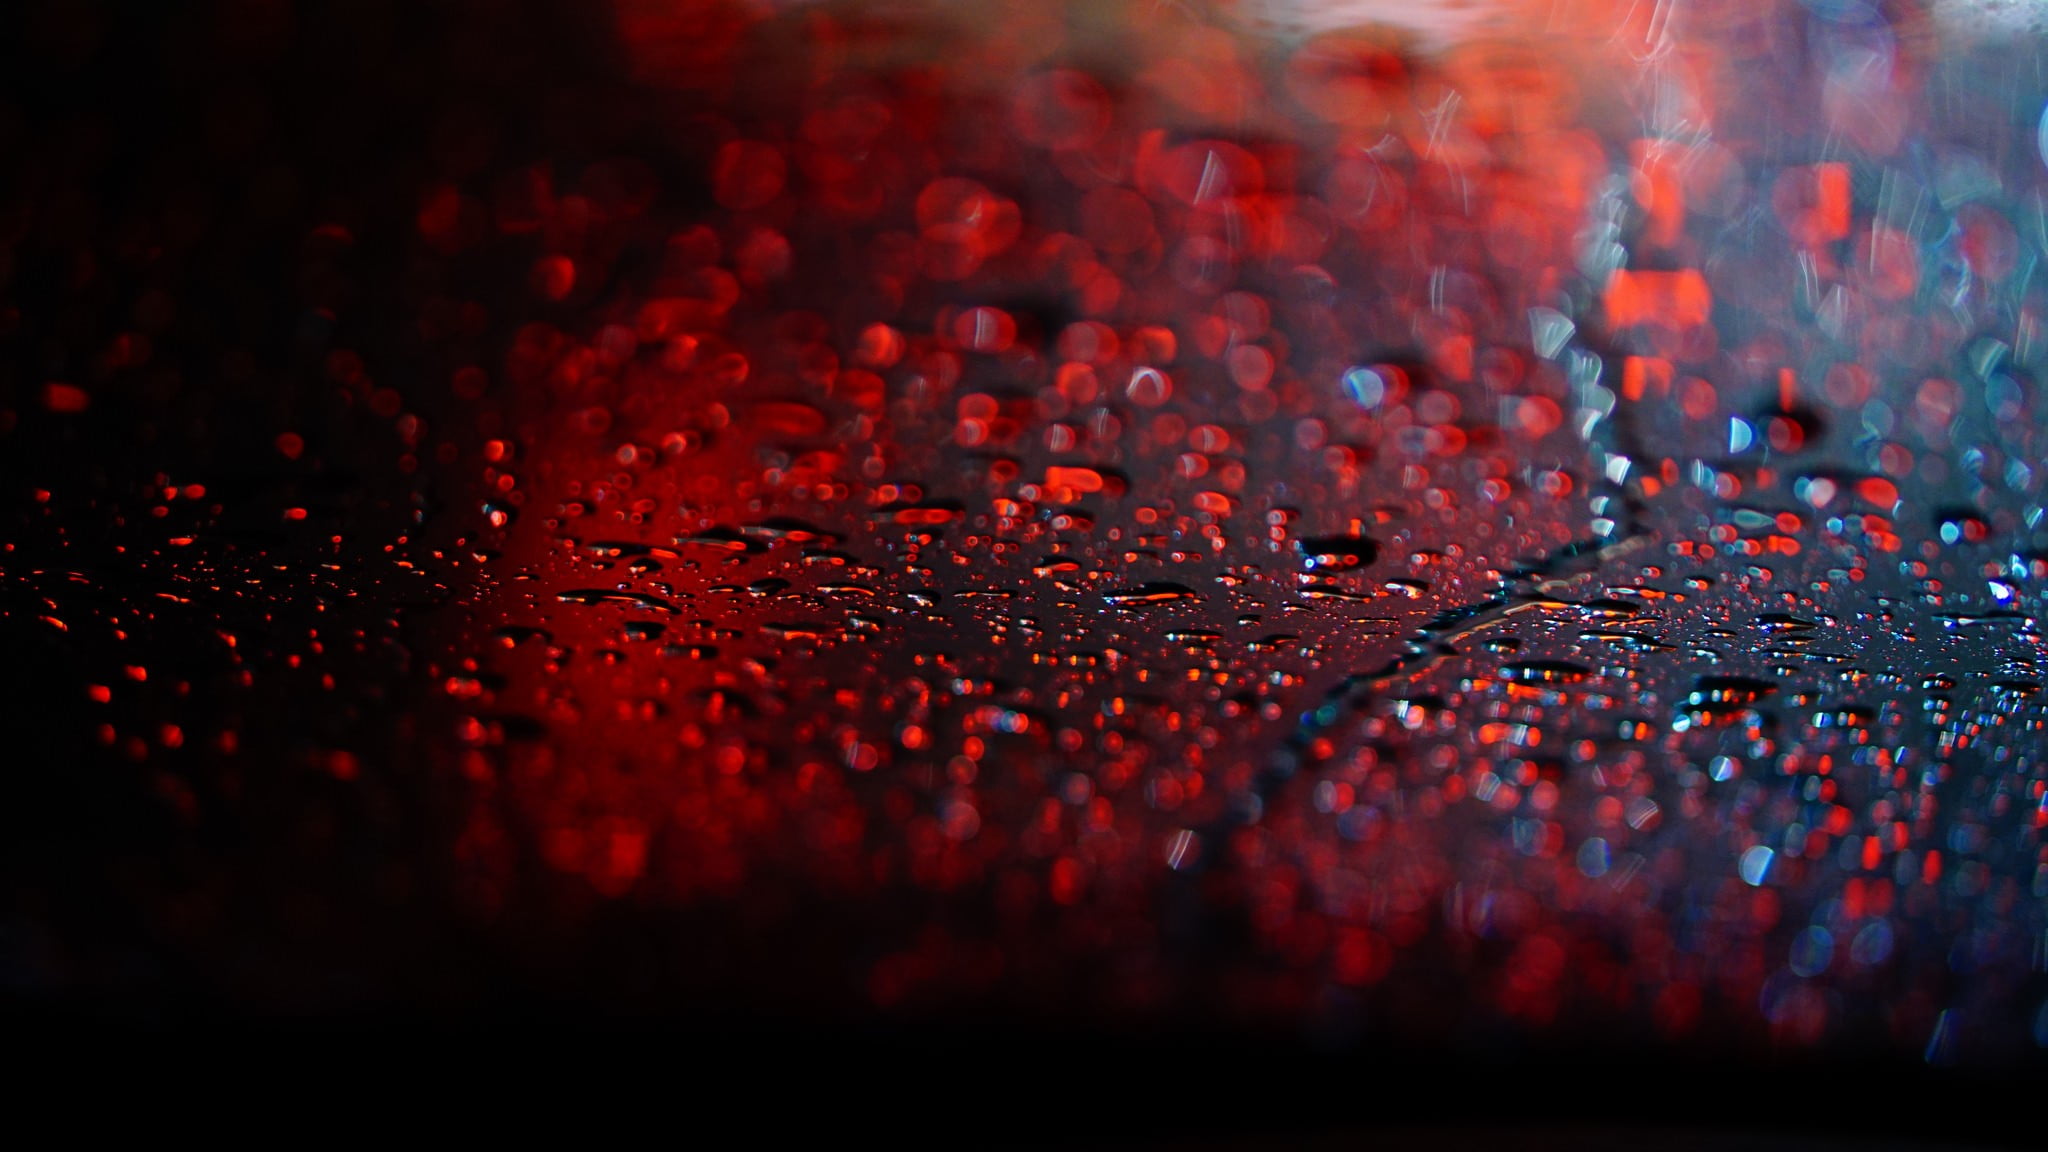 red and black abstract painting, rain, water drops, bokeh, depth of field